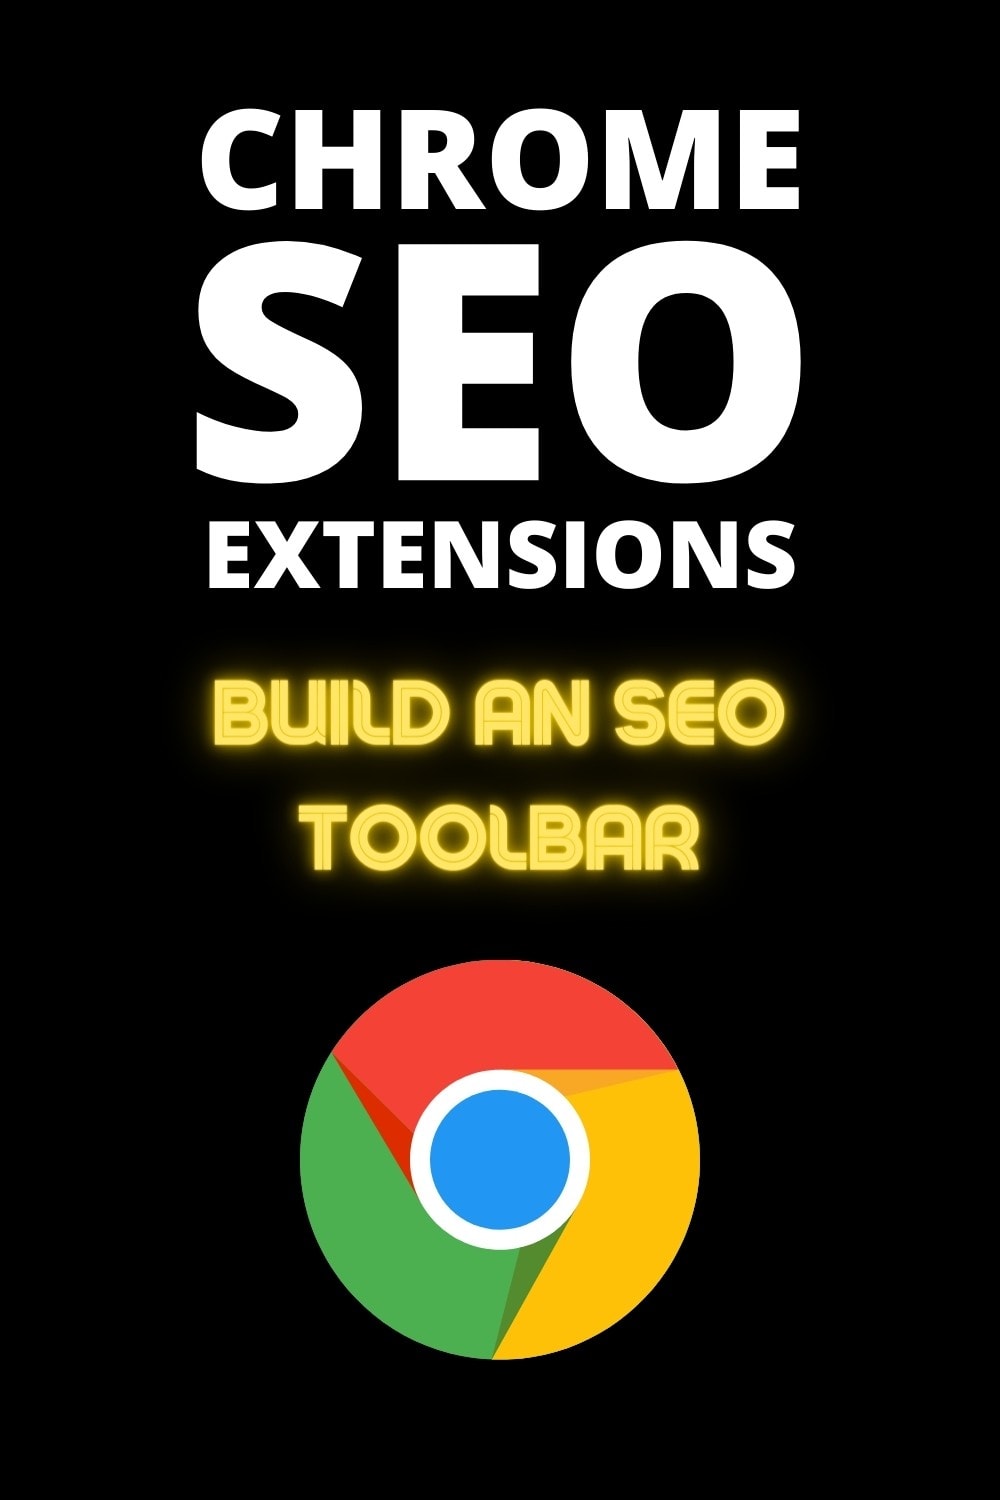 Chrome Seo Extensions